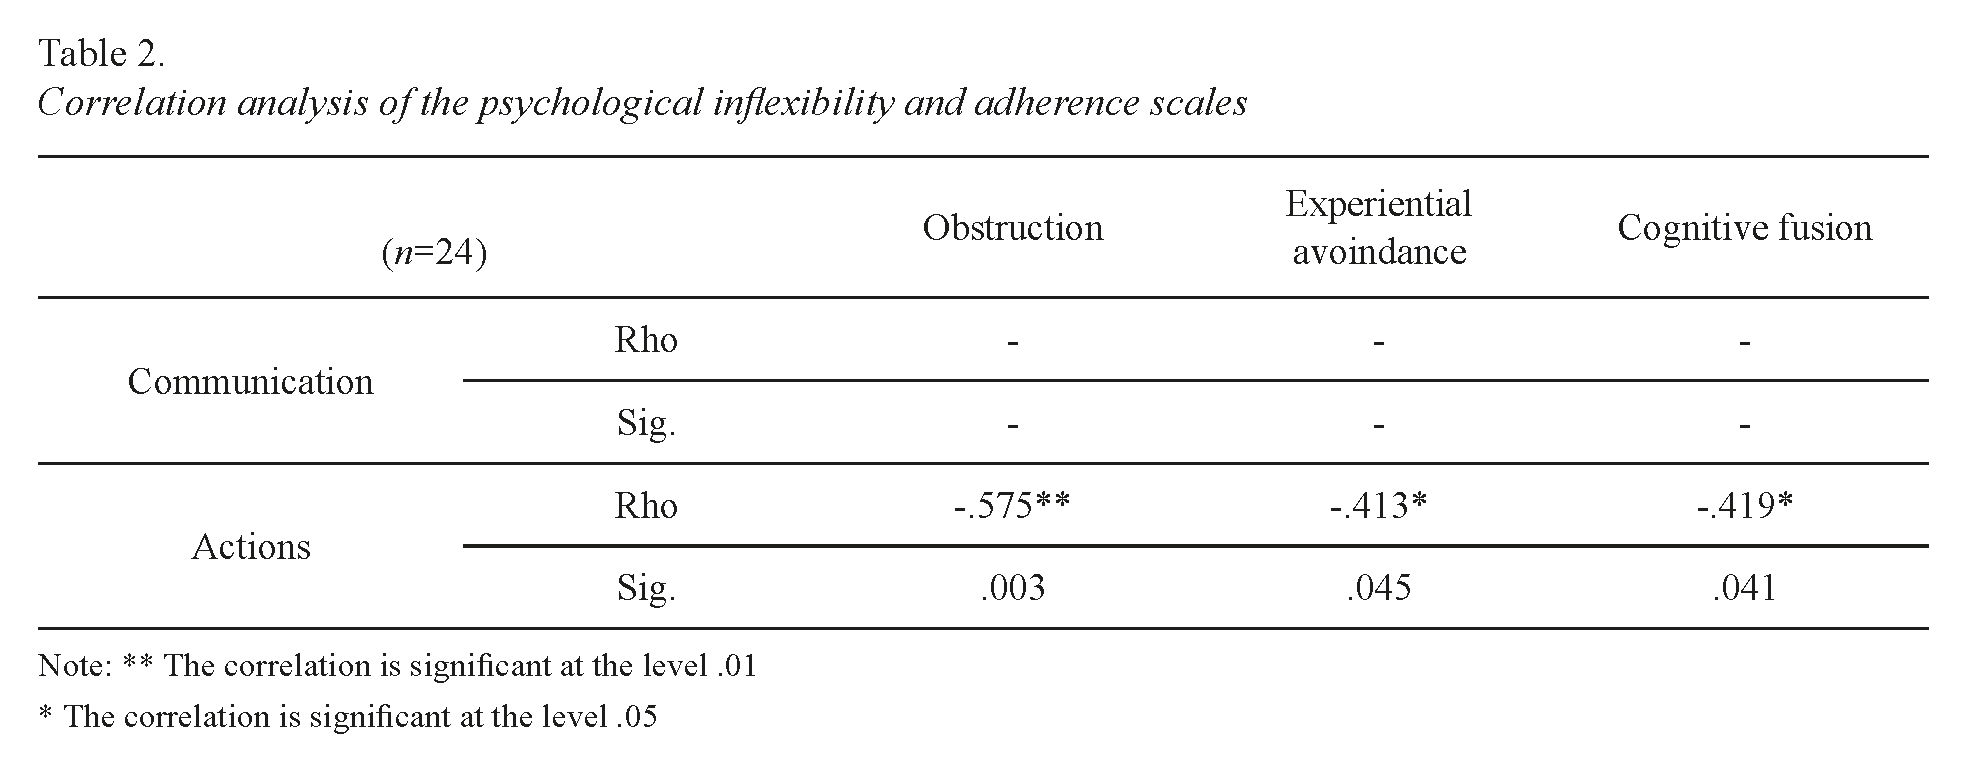 Correlation analysis of the psychological inflexibility and adherence scales